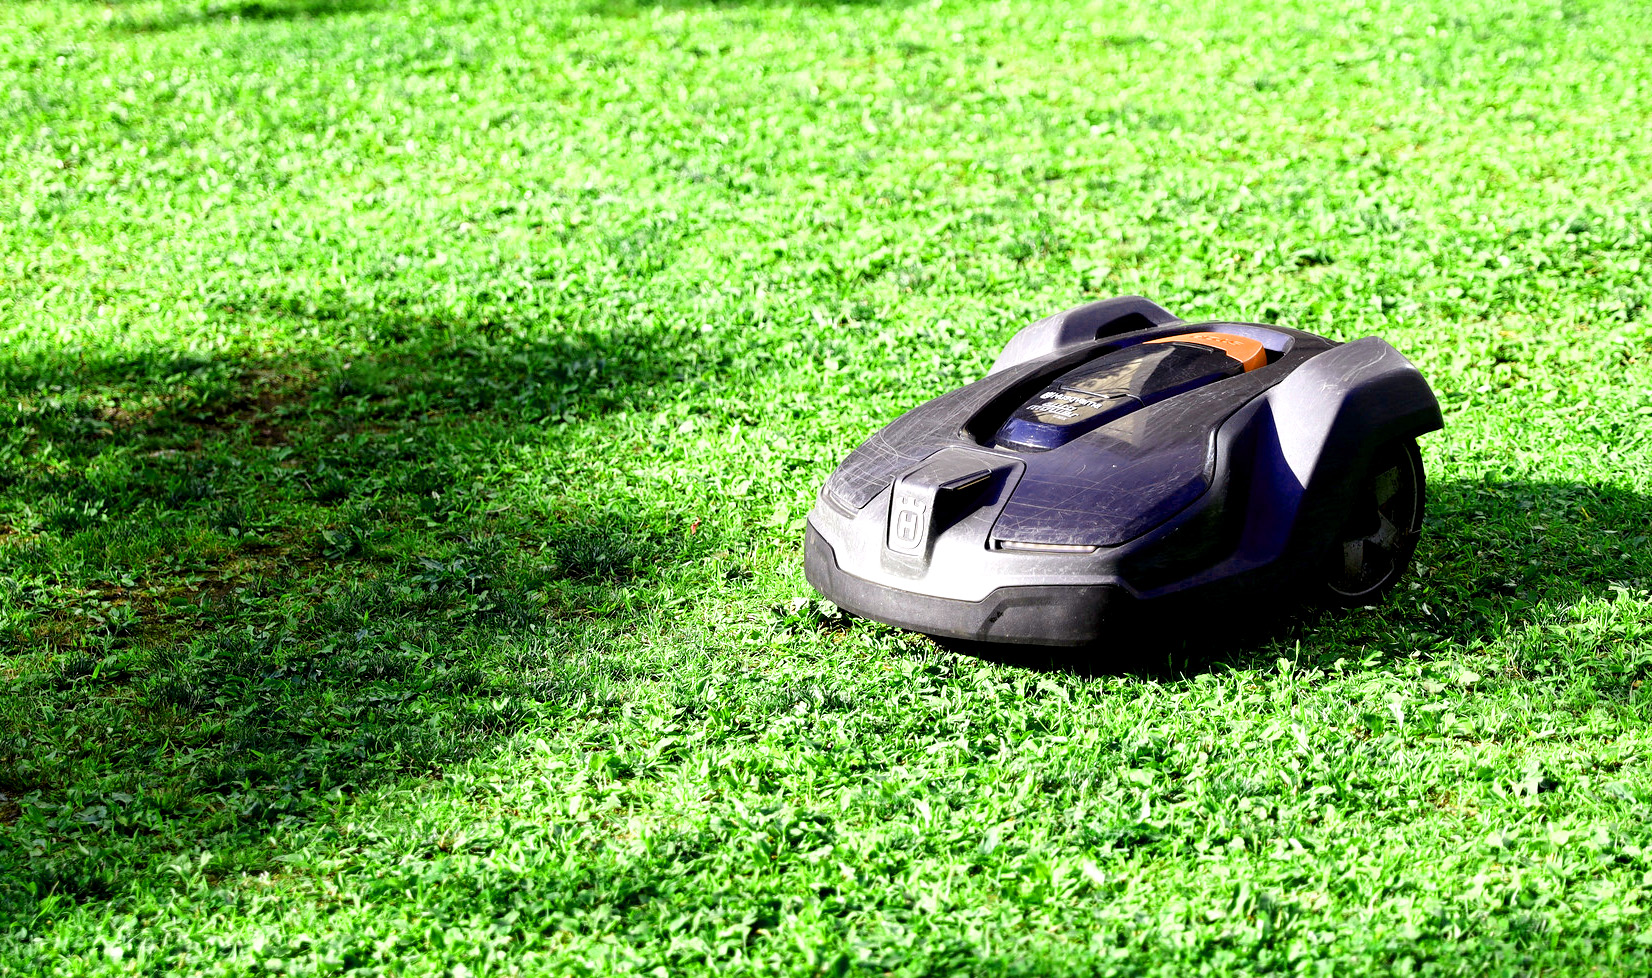 A robotic electric lawnmower sits on a green lawn